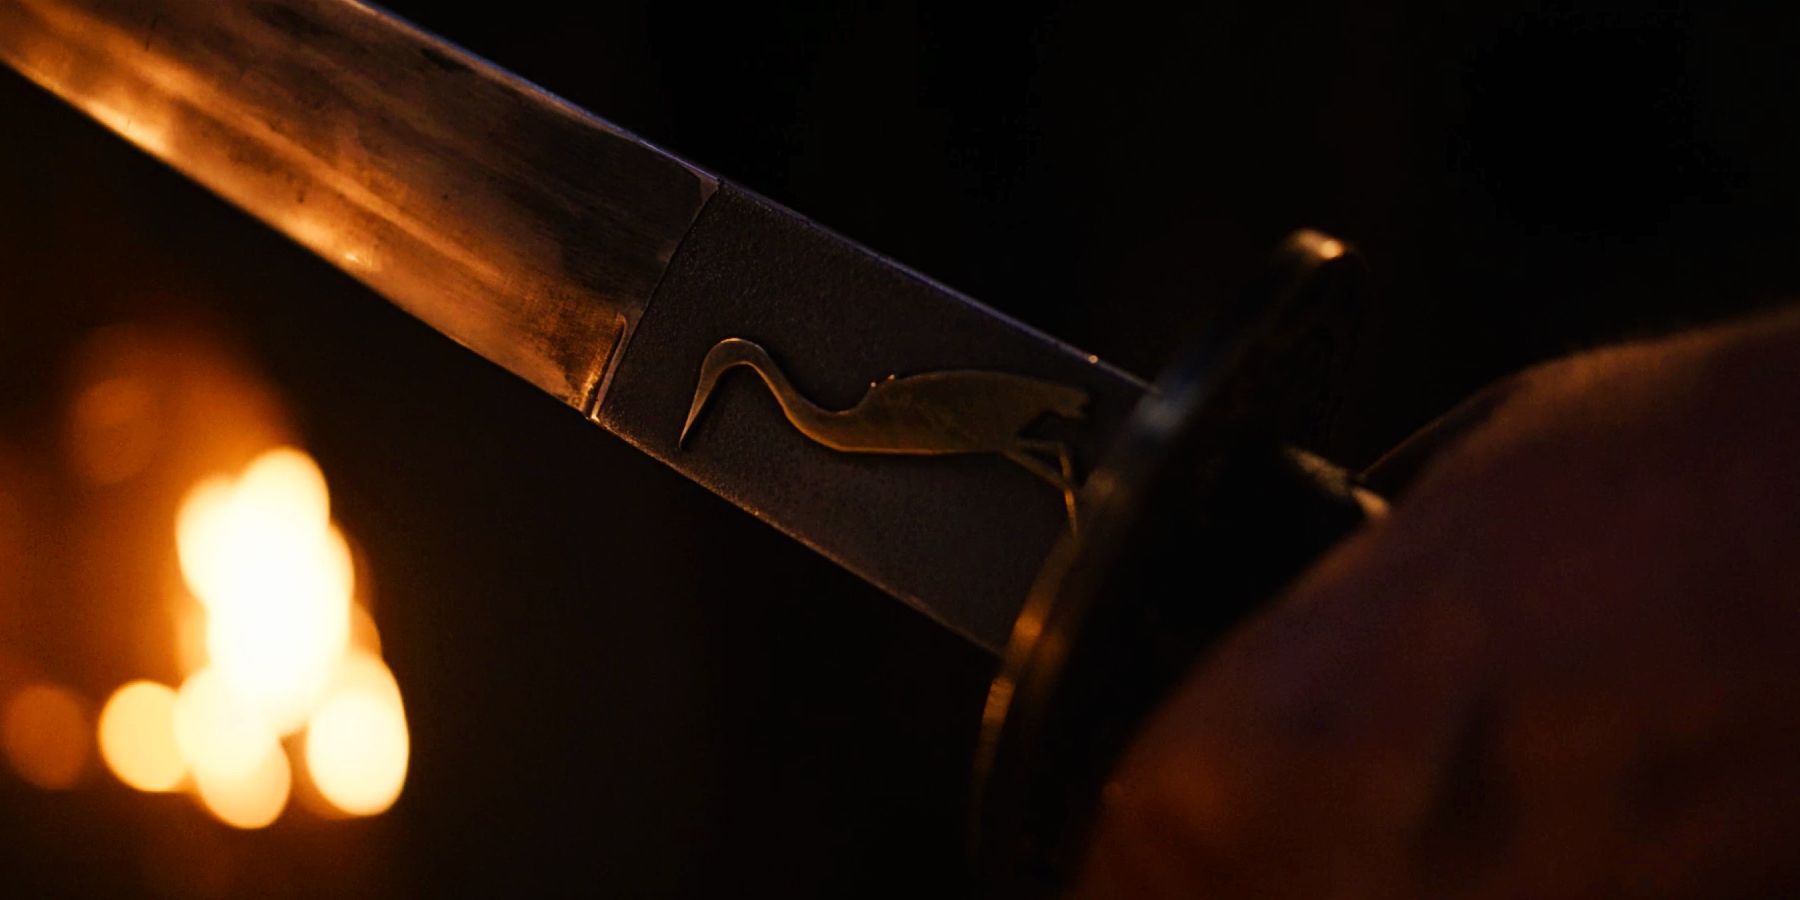 Tam Al'Thor's Heron marked blade from The Wheel of Time